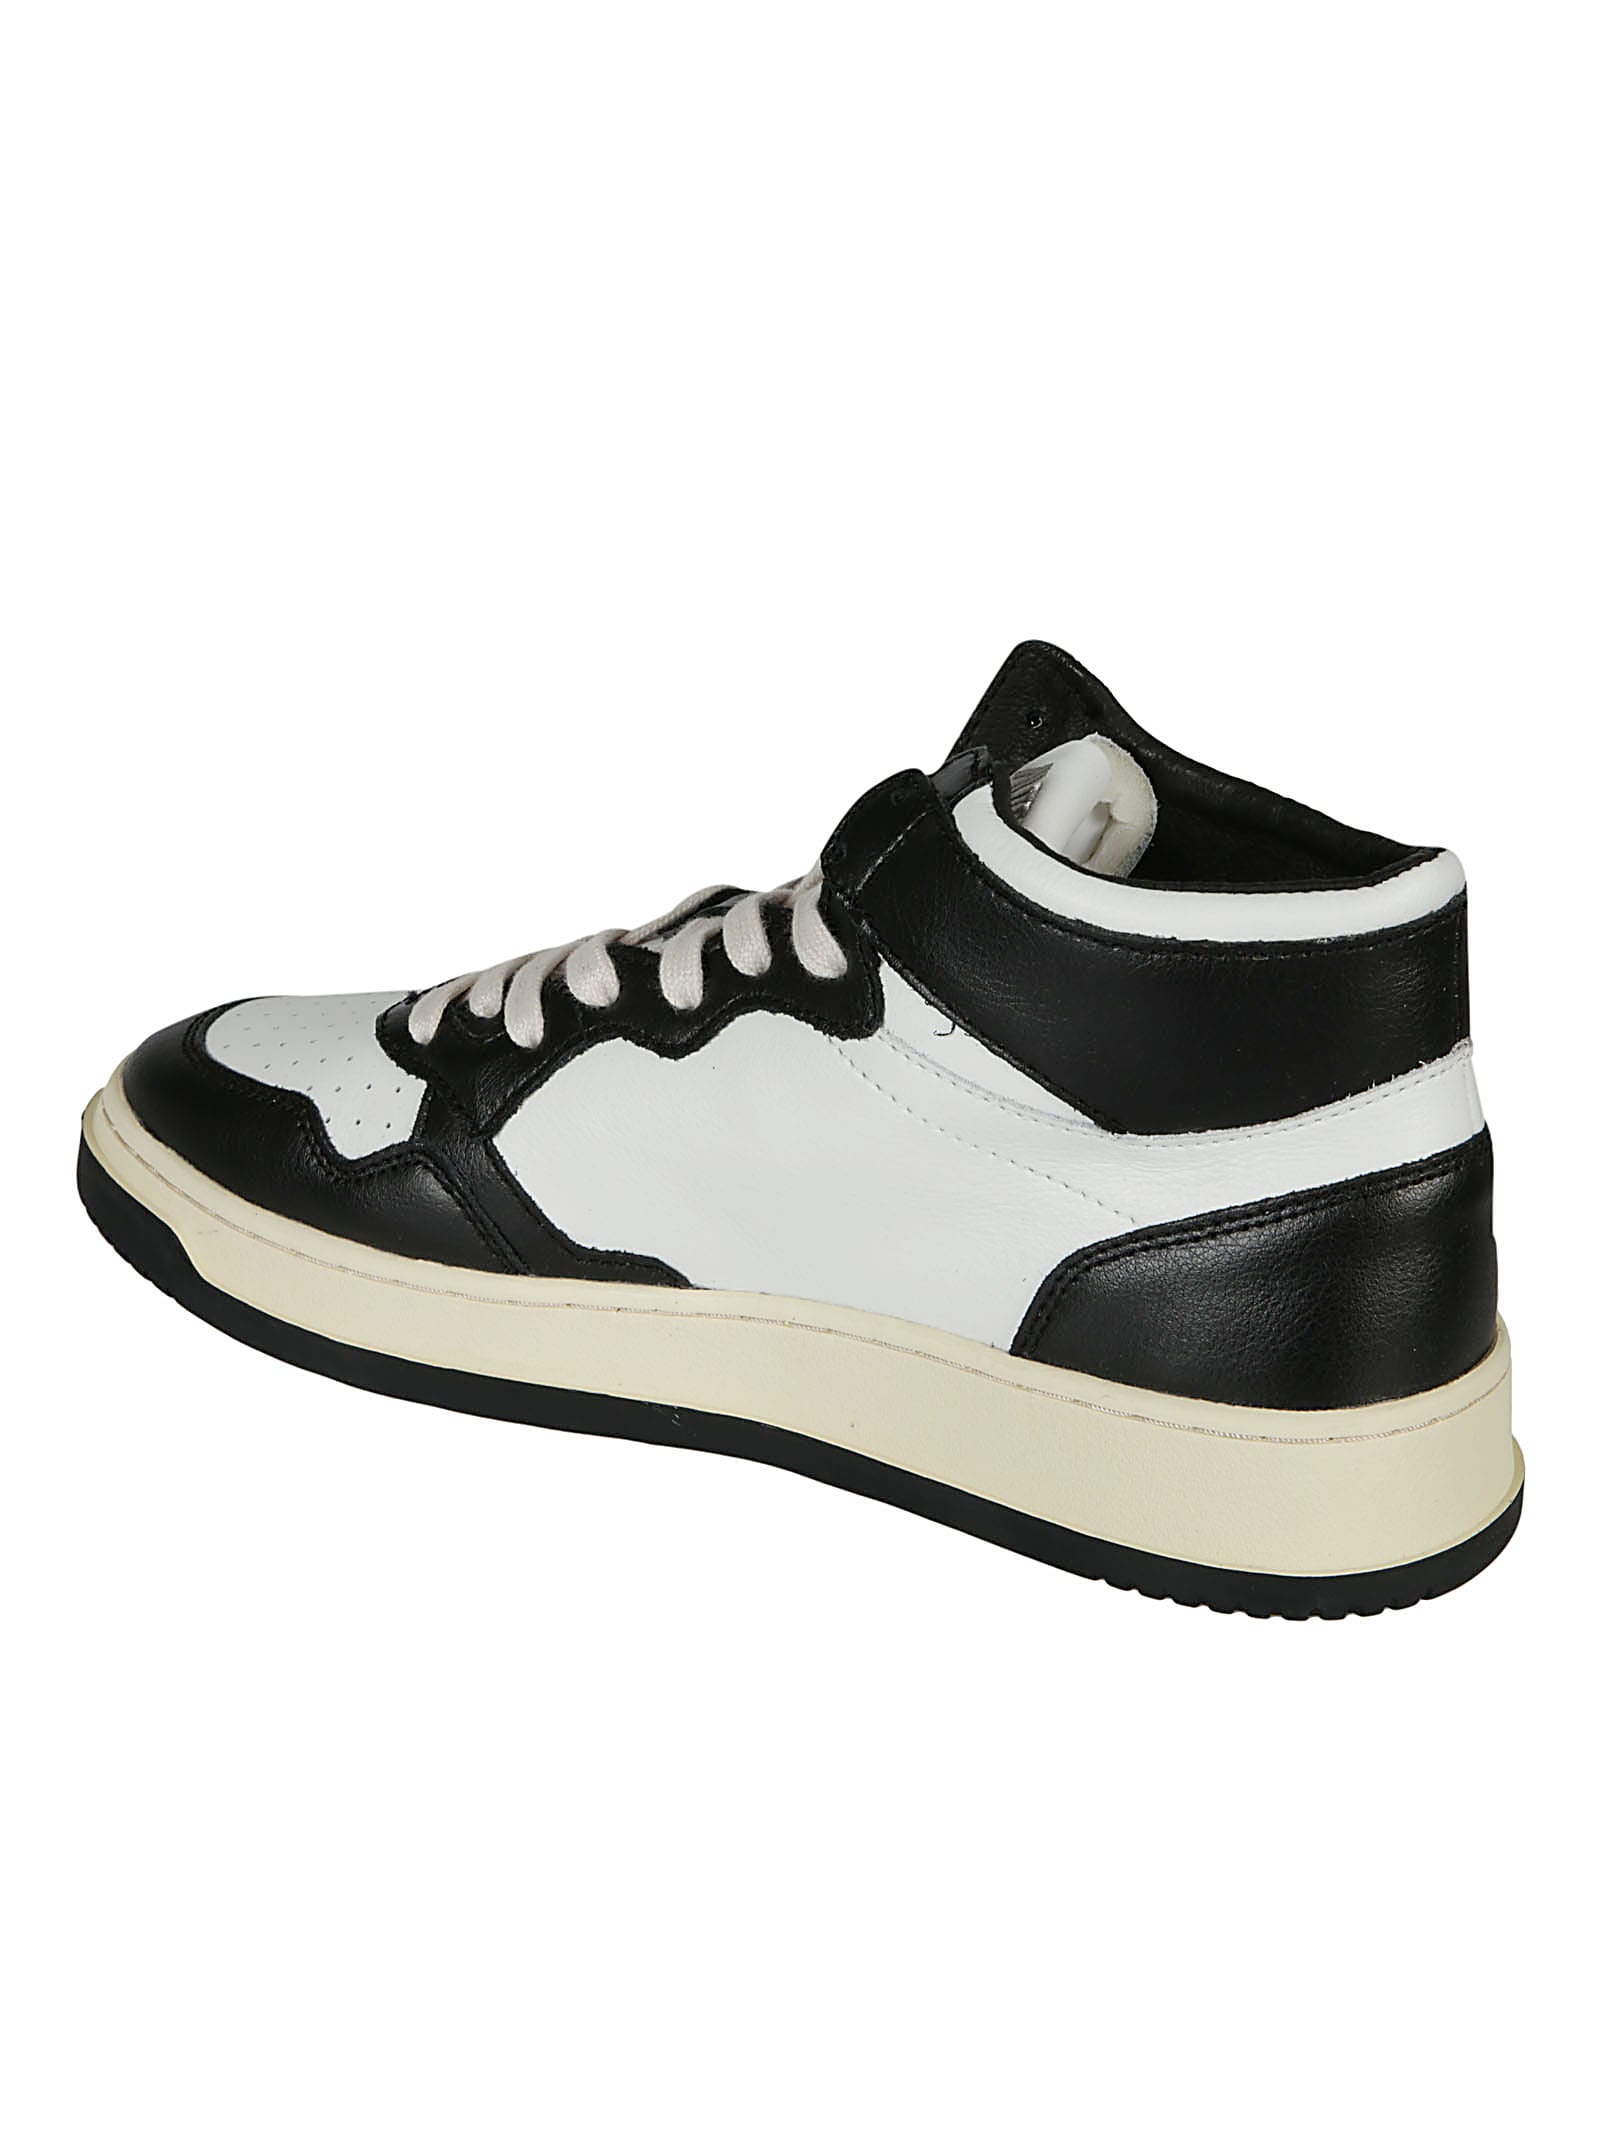 Shop Autry Logo Patched Mid Sneakers In Bianco E Nero